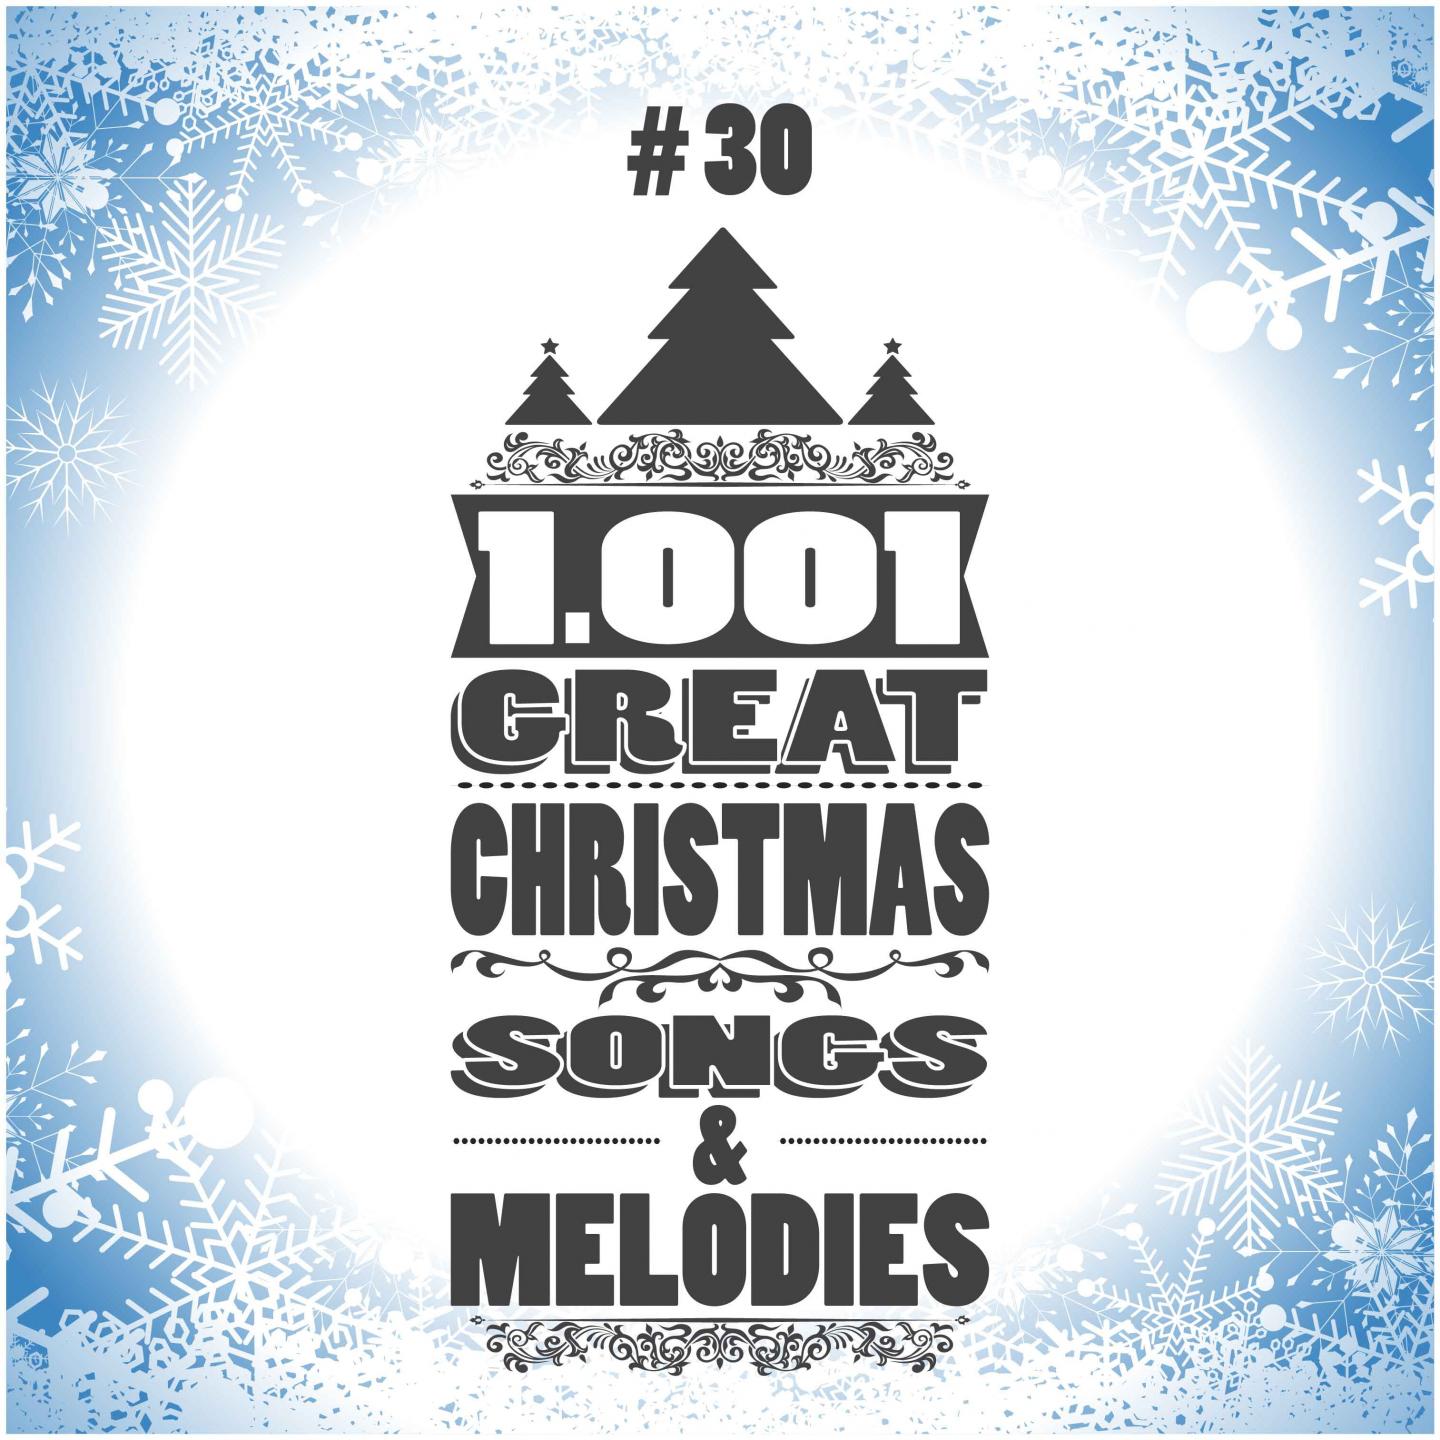 1001 Great Christmas Songs & Melodies, Vol. 30